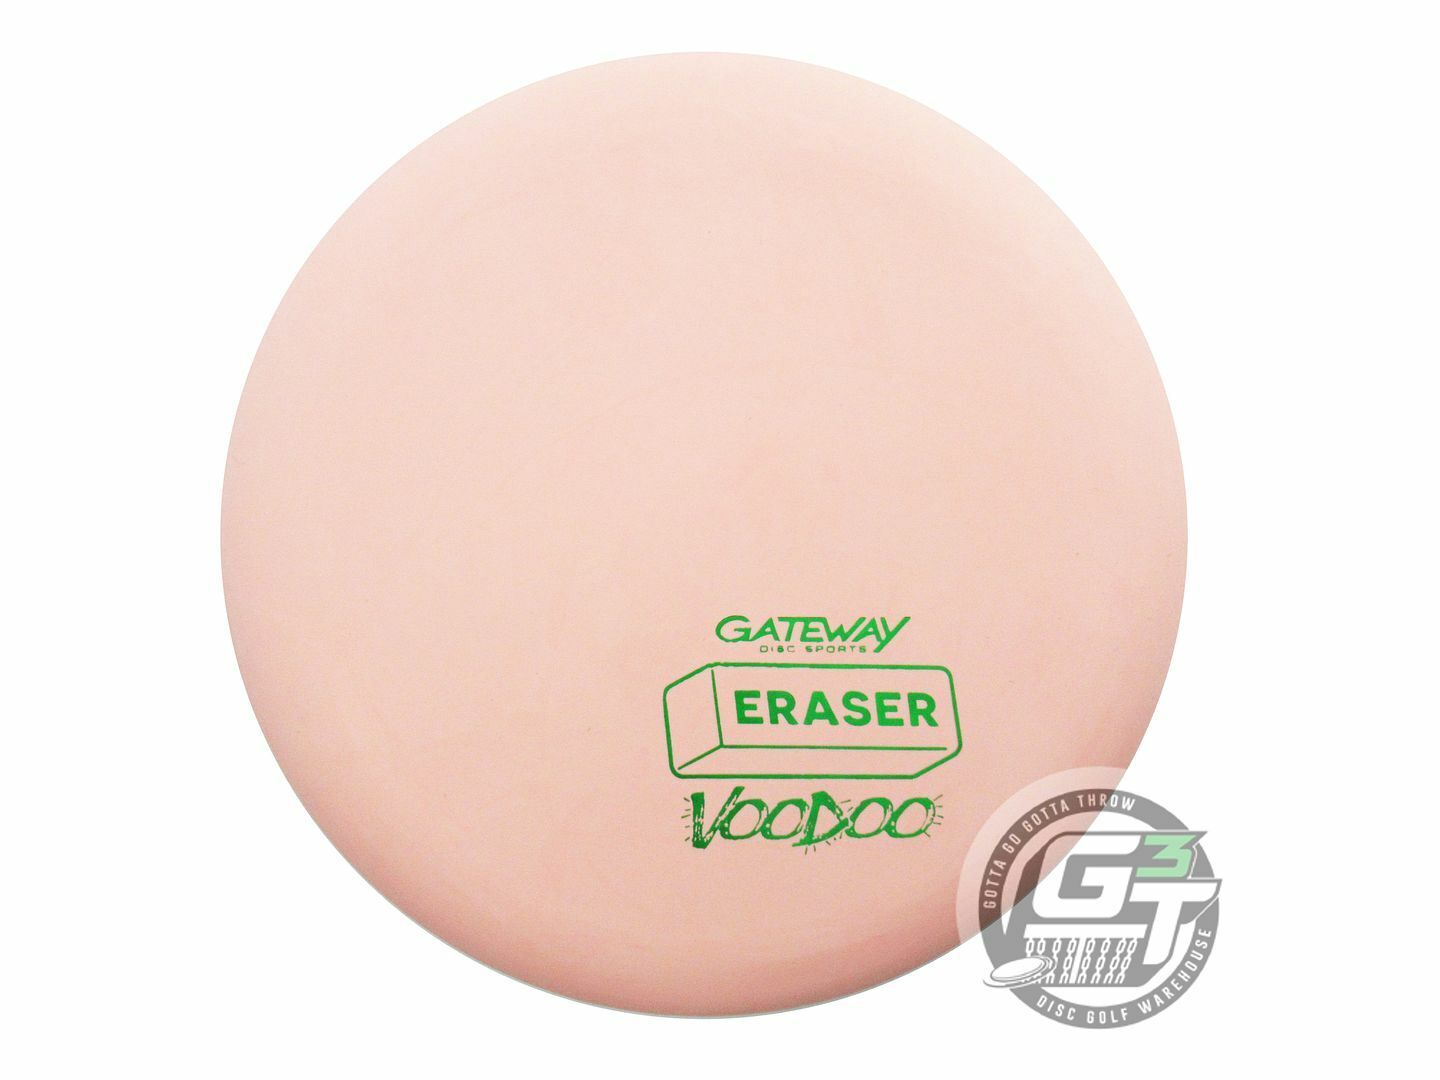 Gateway Eraser Voodoo Putter Golf Disc (Individually Listed)